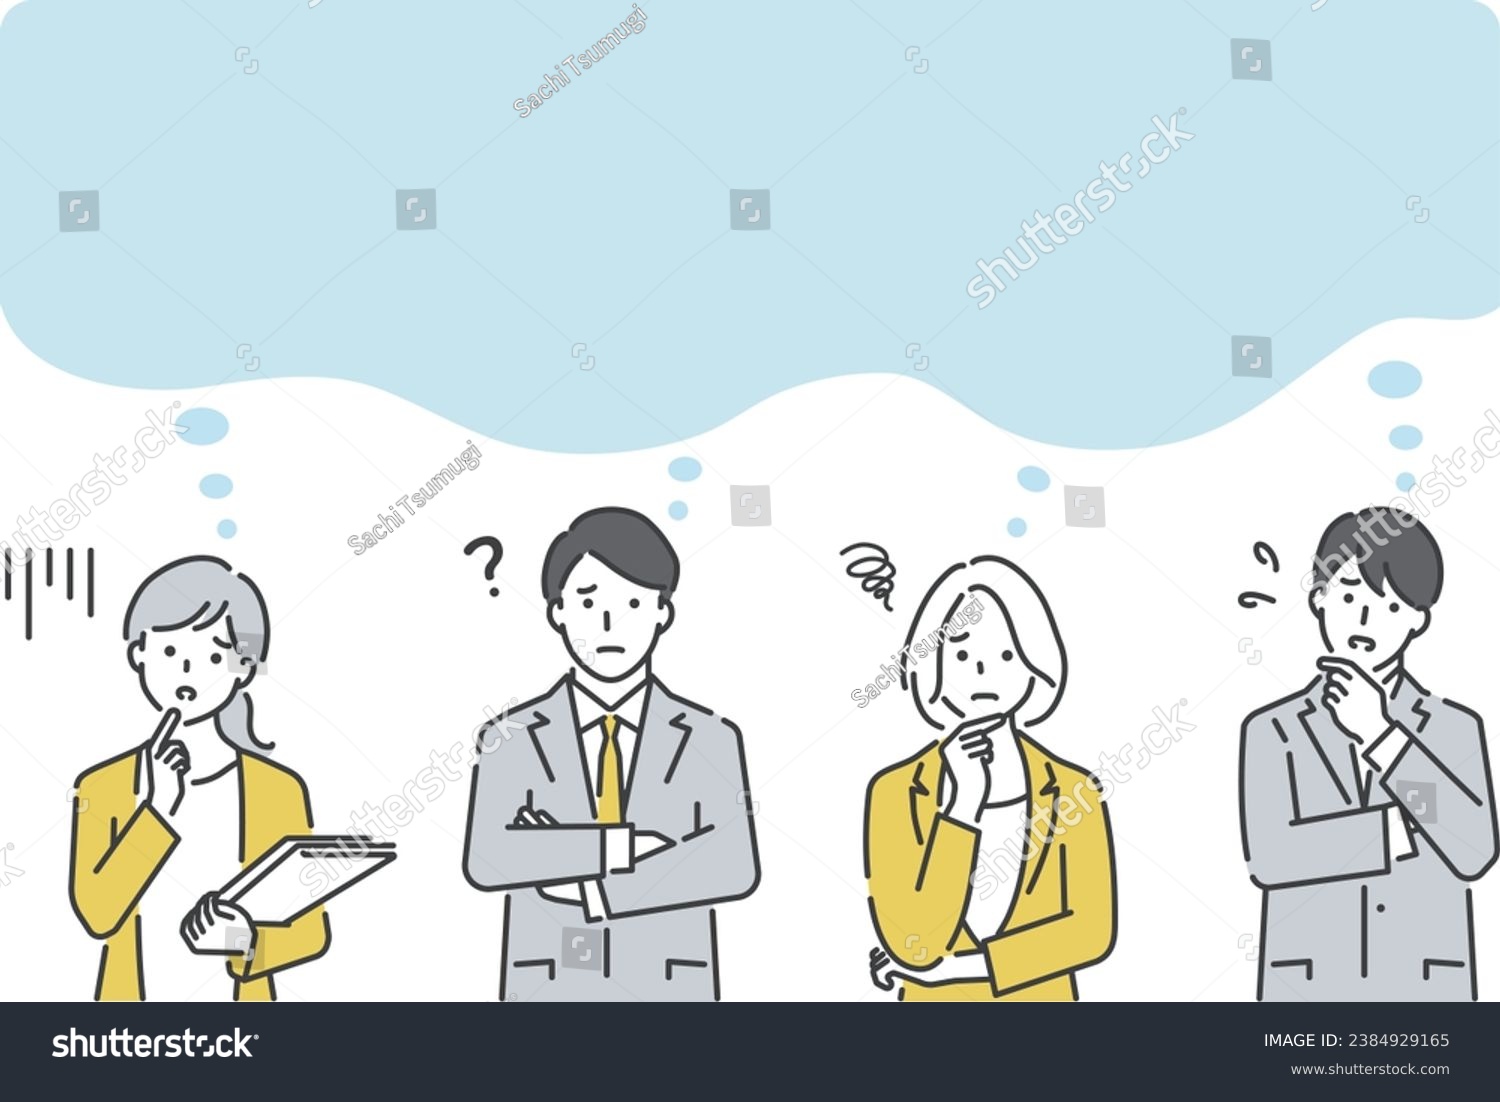 Vector illustration material of a worried business person. Upper body. #2384929165